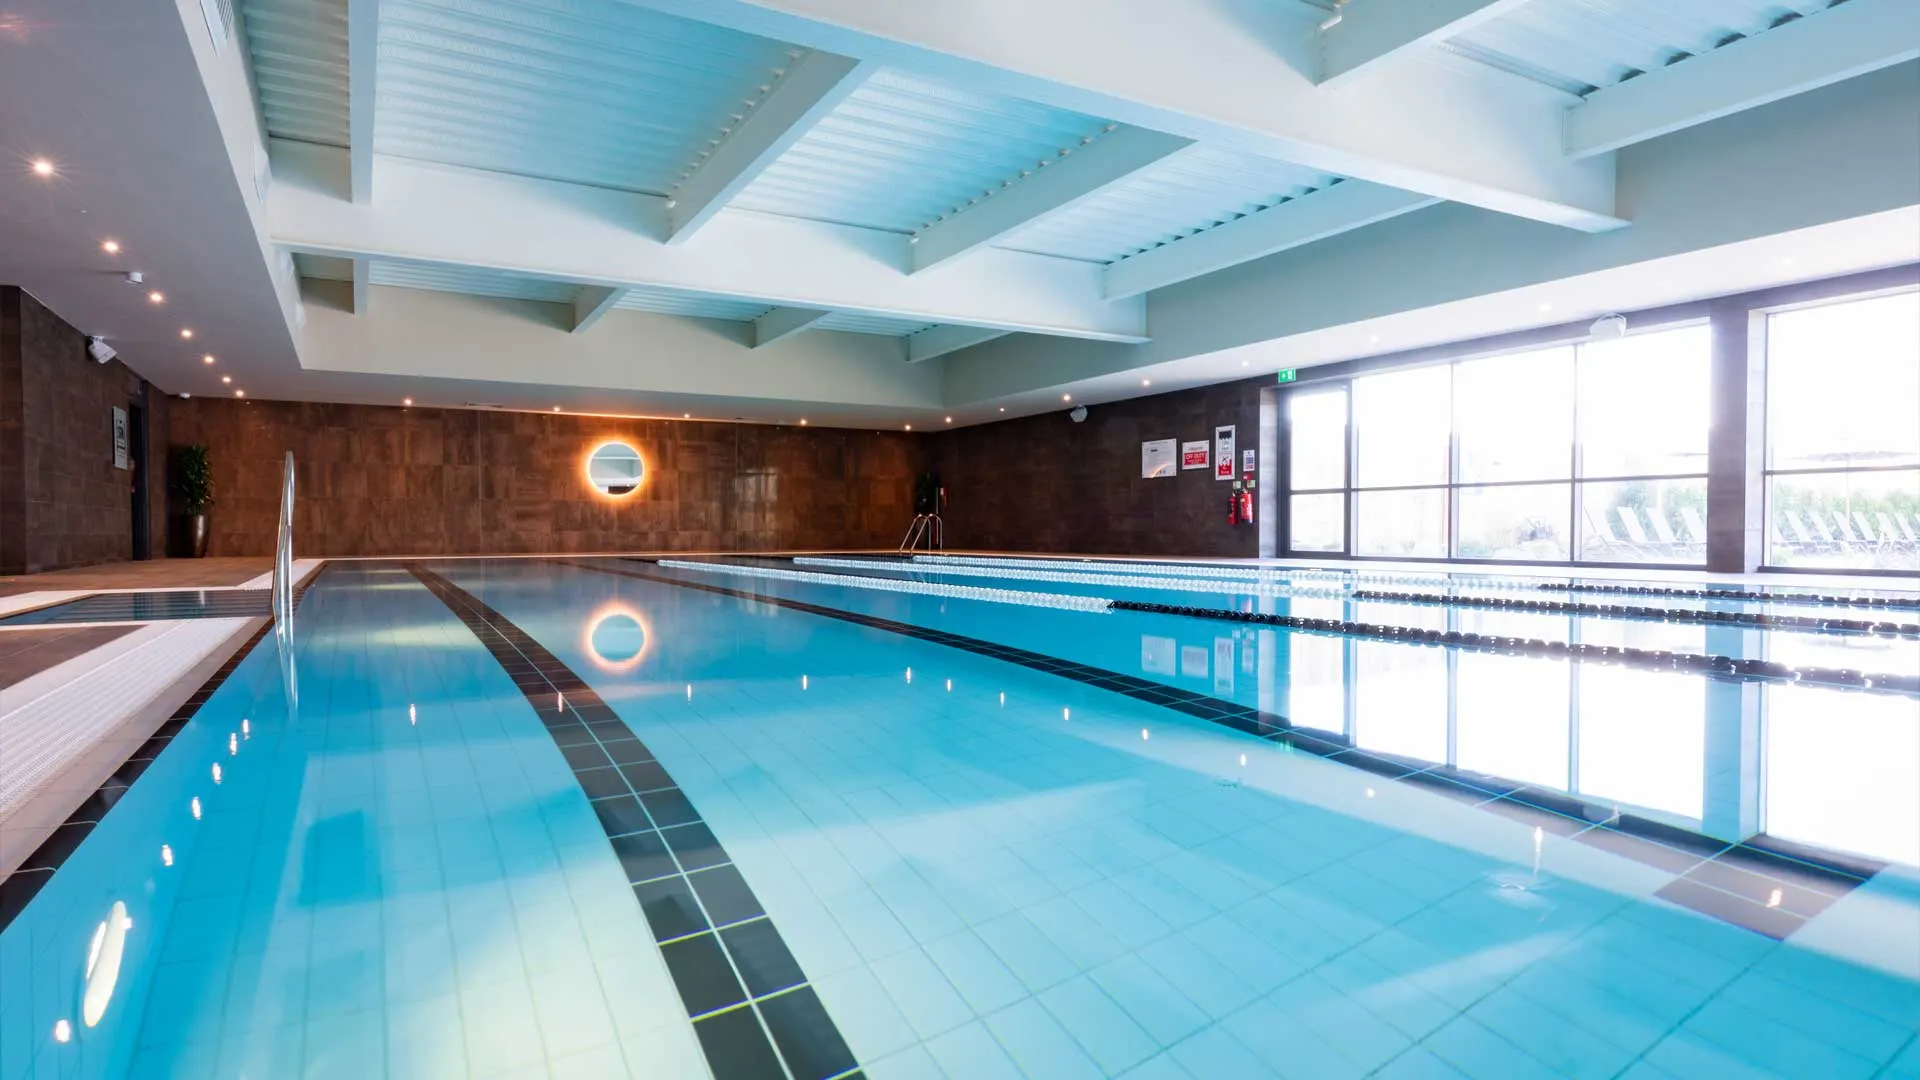 David lloyd accelerates its expansion as it adds three more clubs to its portfolio